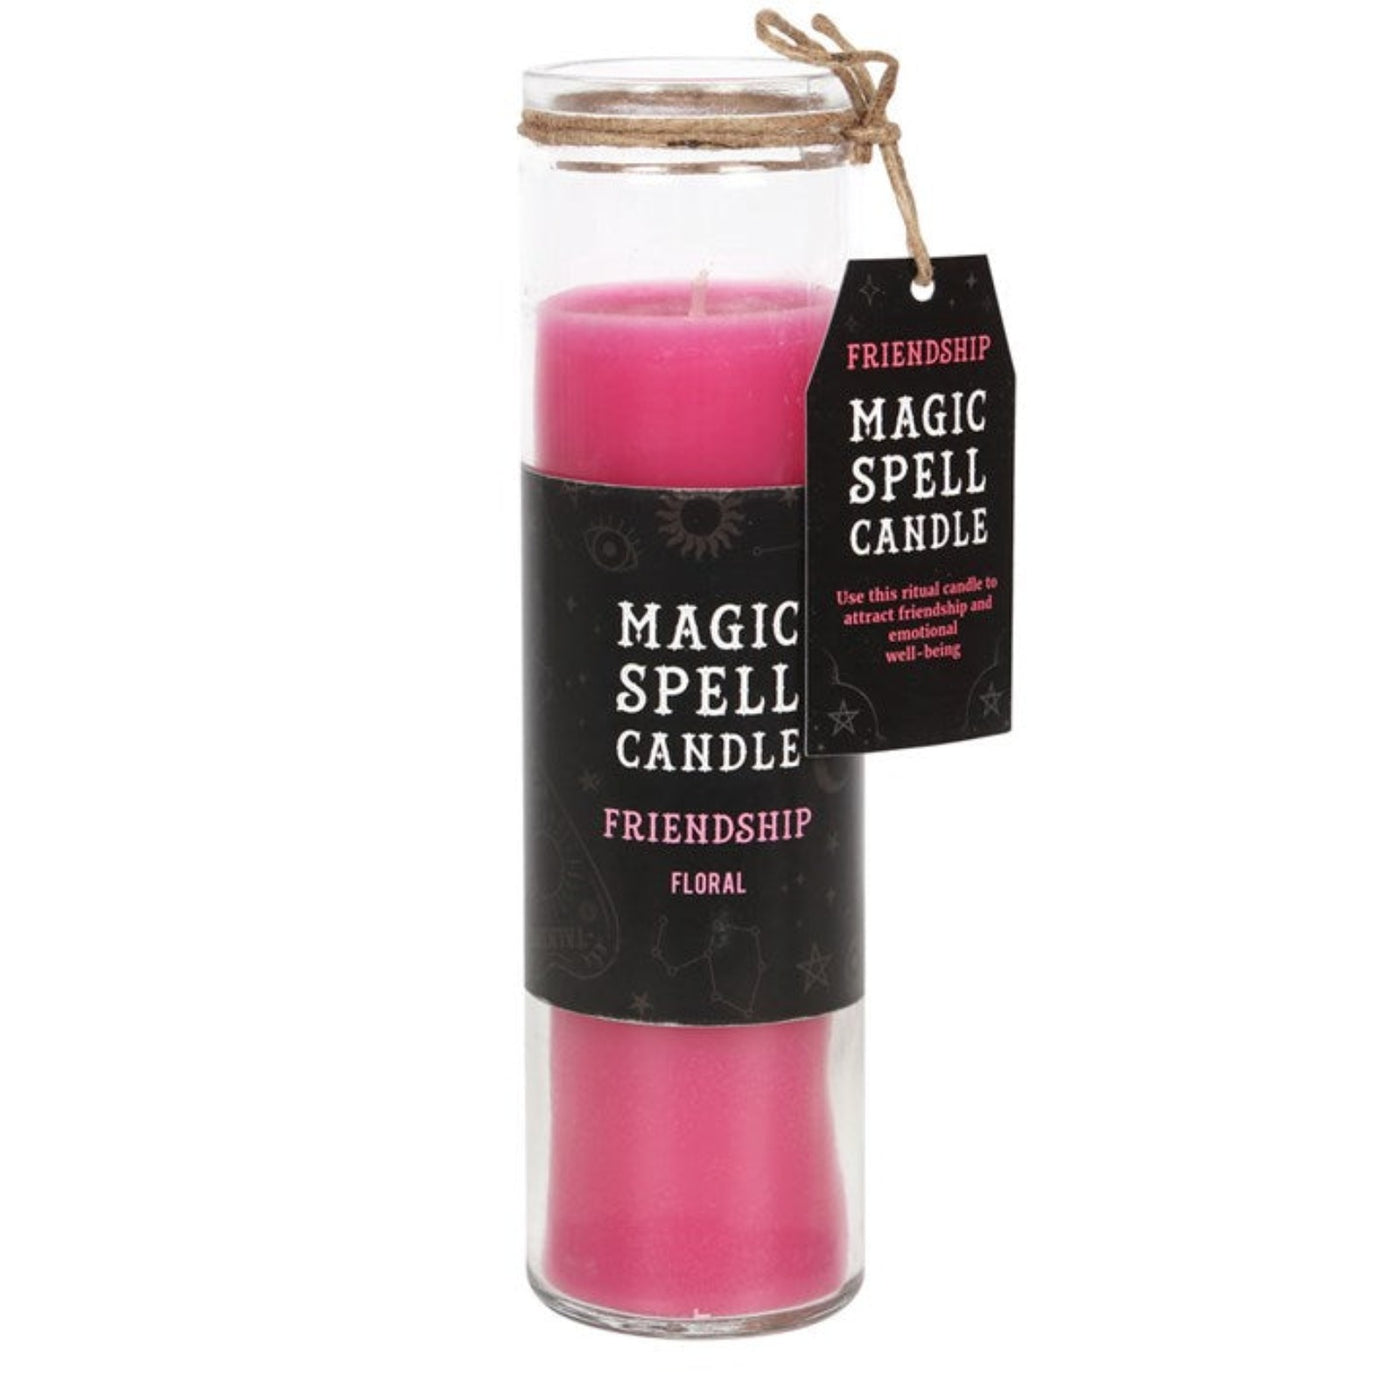 Fragranced Floral 'Friendship' Spell Glass Pink Pillar Candle.